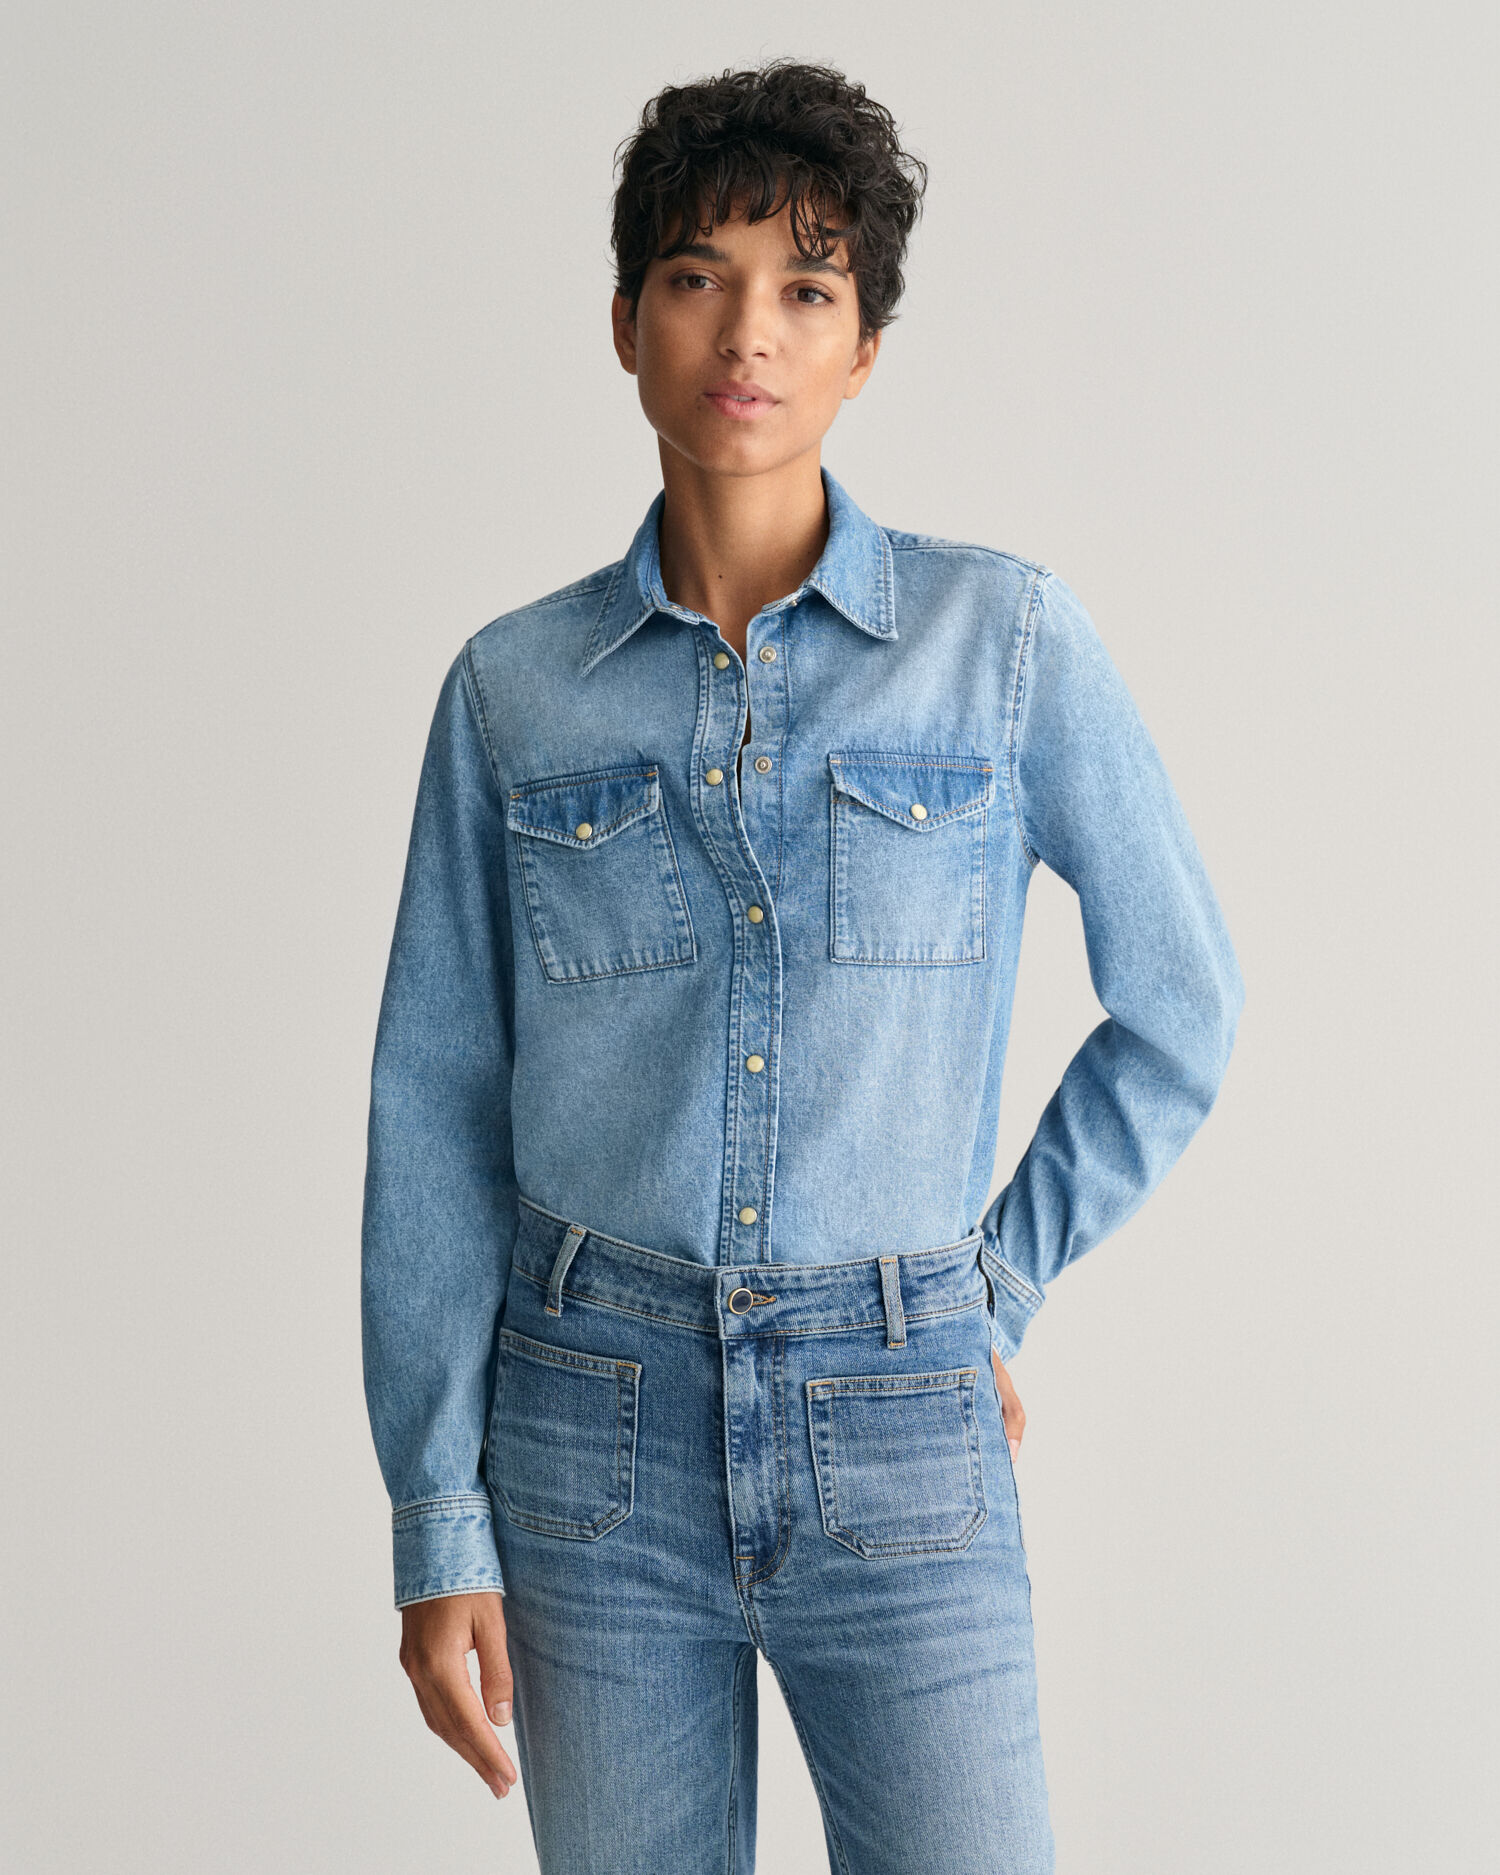 Women's Heritage Washed Denim Shirt | L.L.Bean for Business